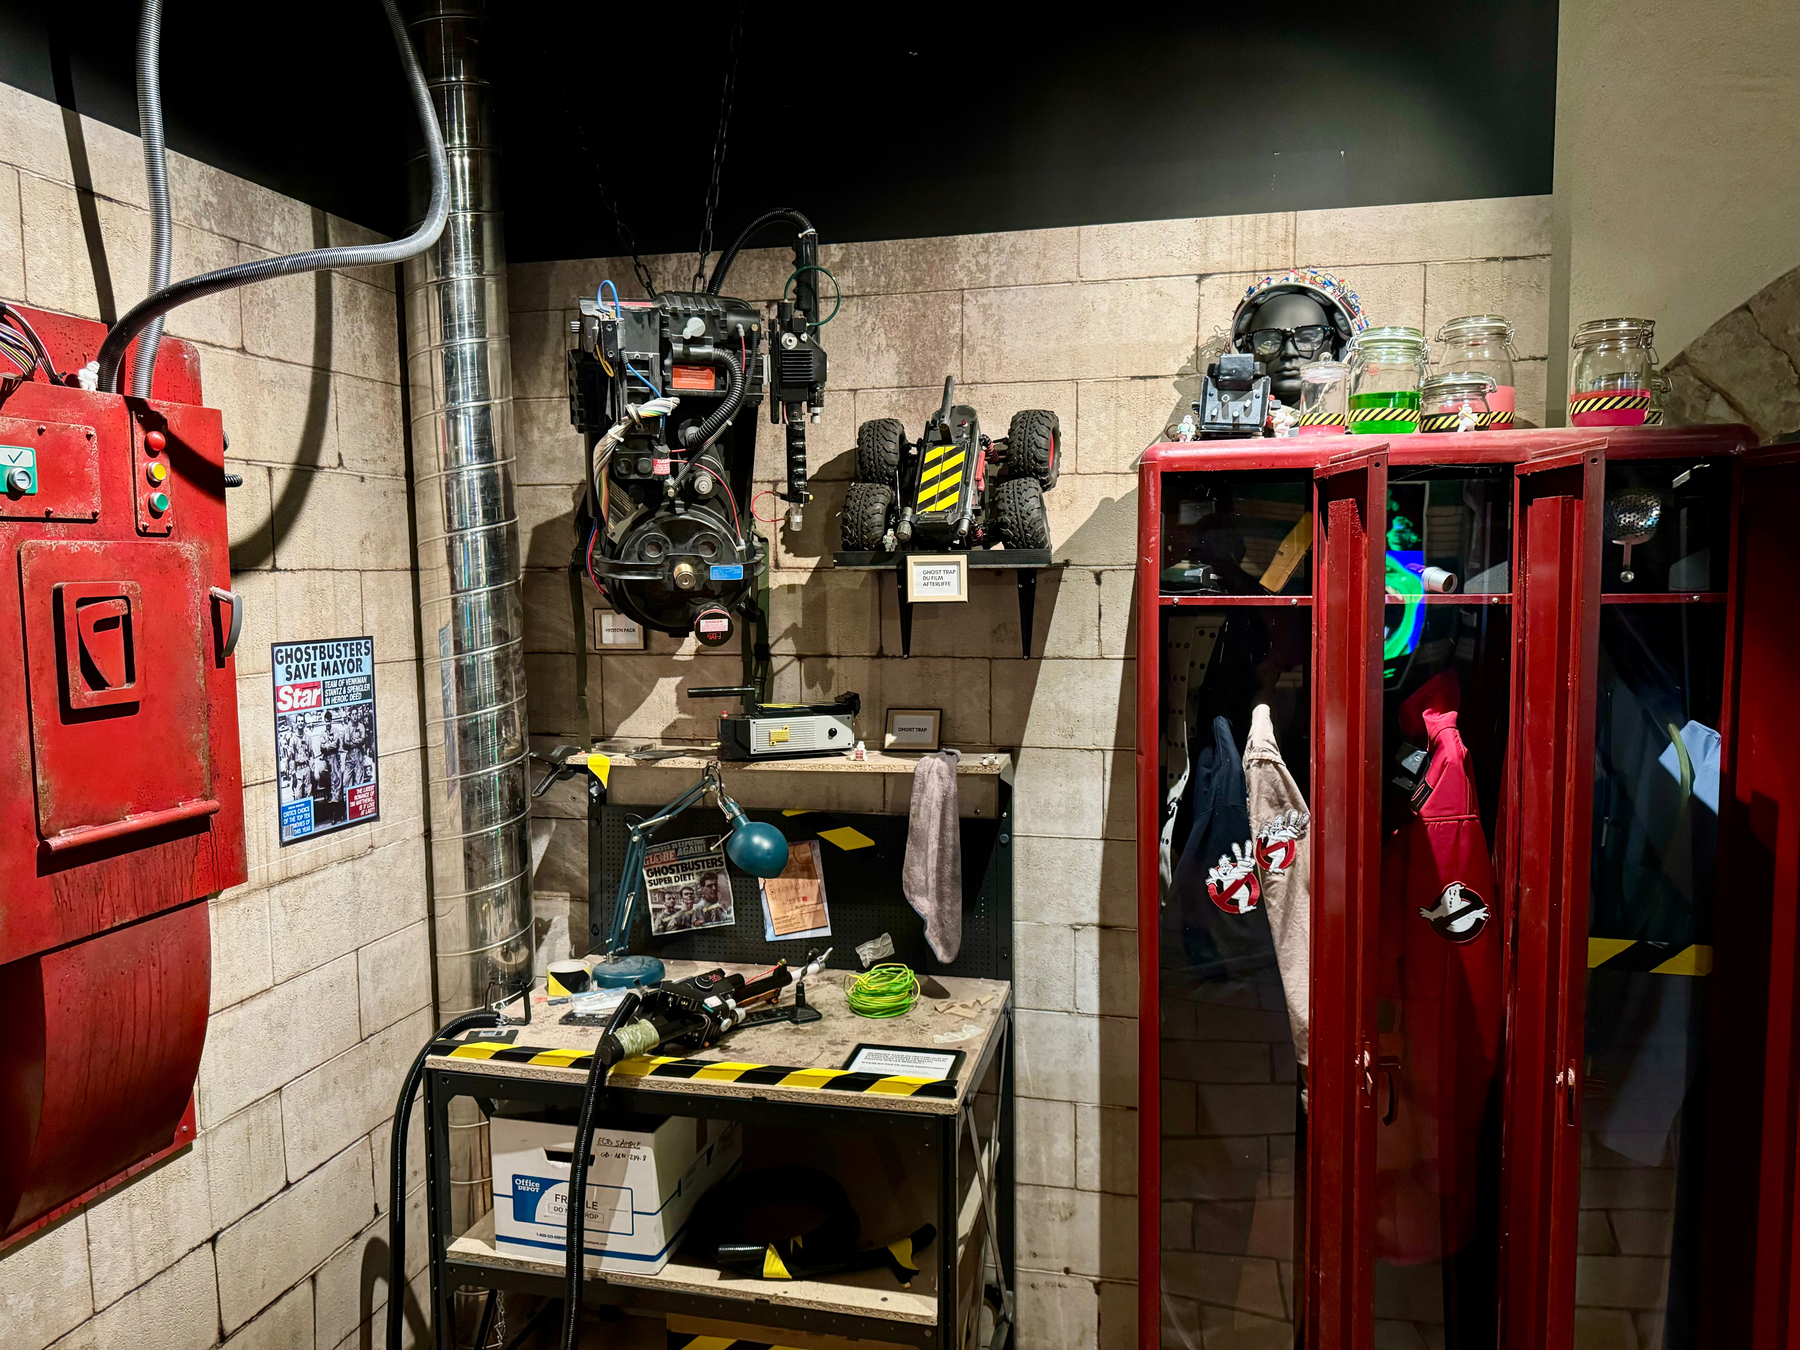 A Ghostbusters-themed display featuring a Proton Pack, ghost traps, a PKE Meter, lockers with jumpsuits, and themed collectibles.